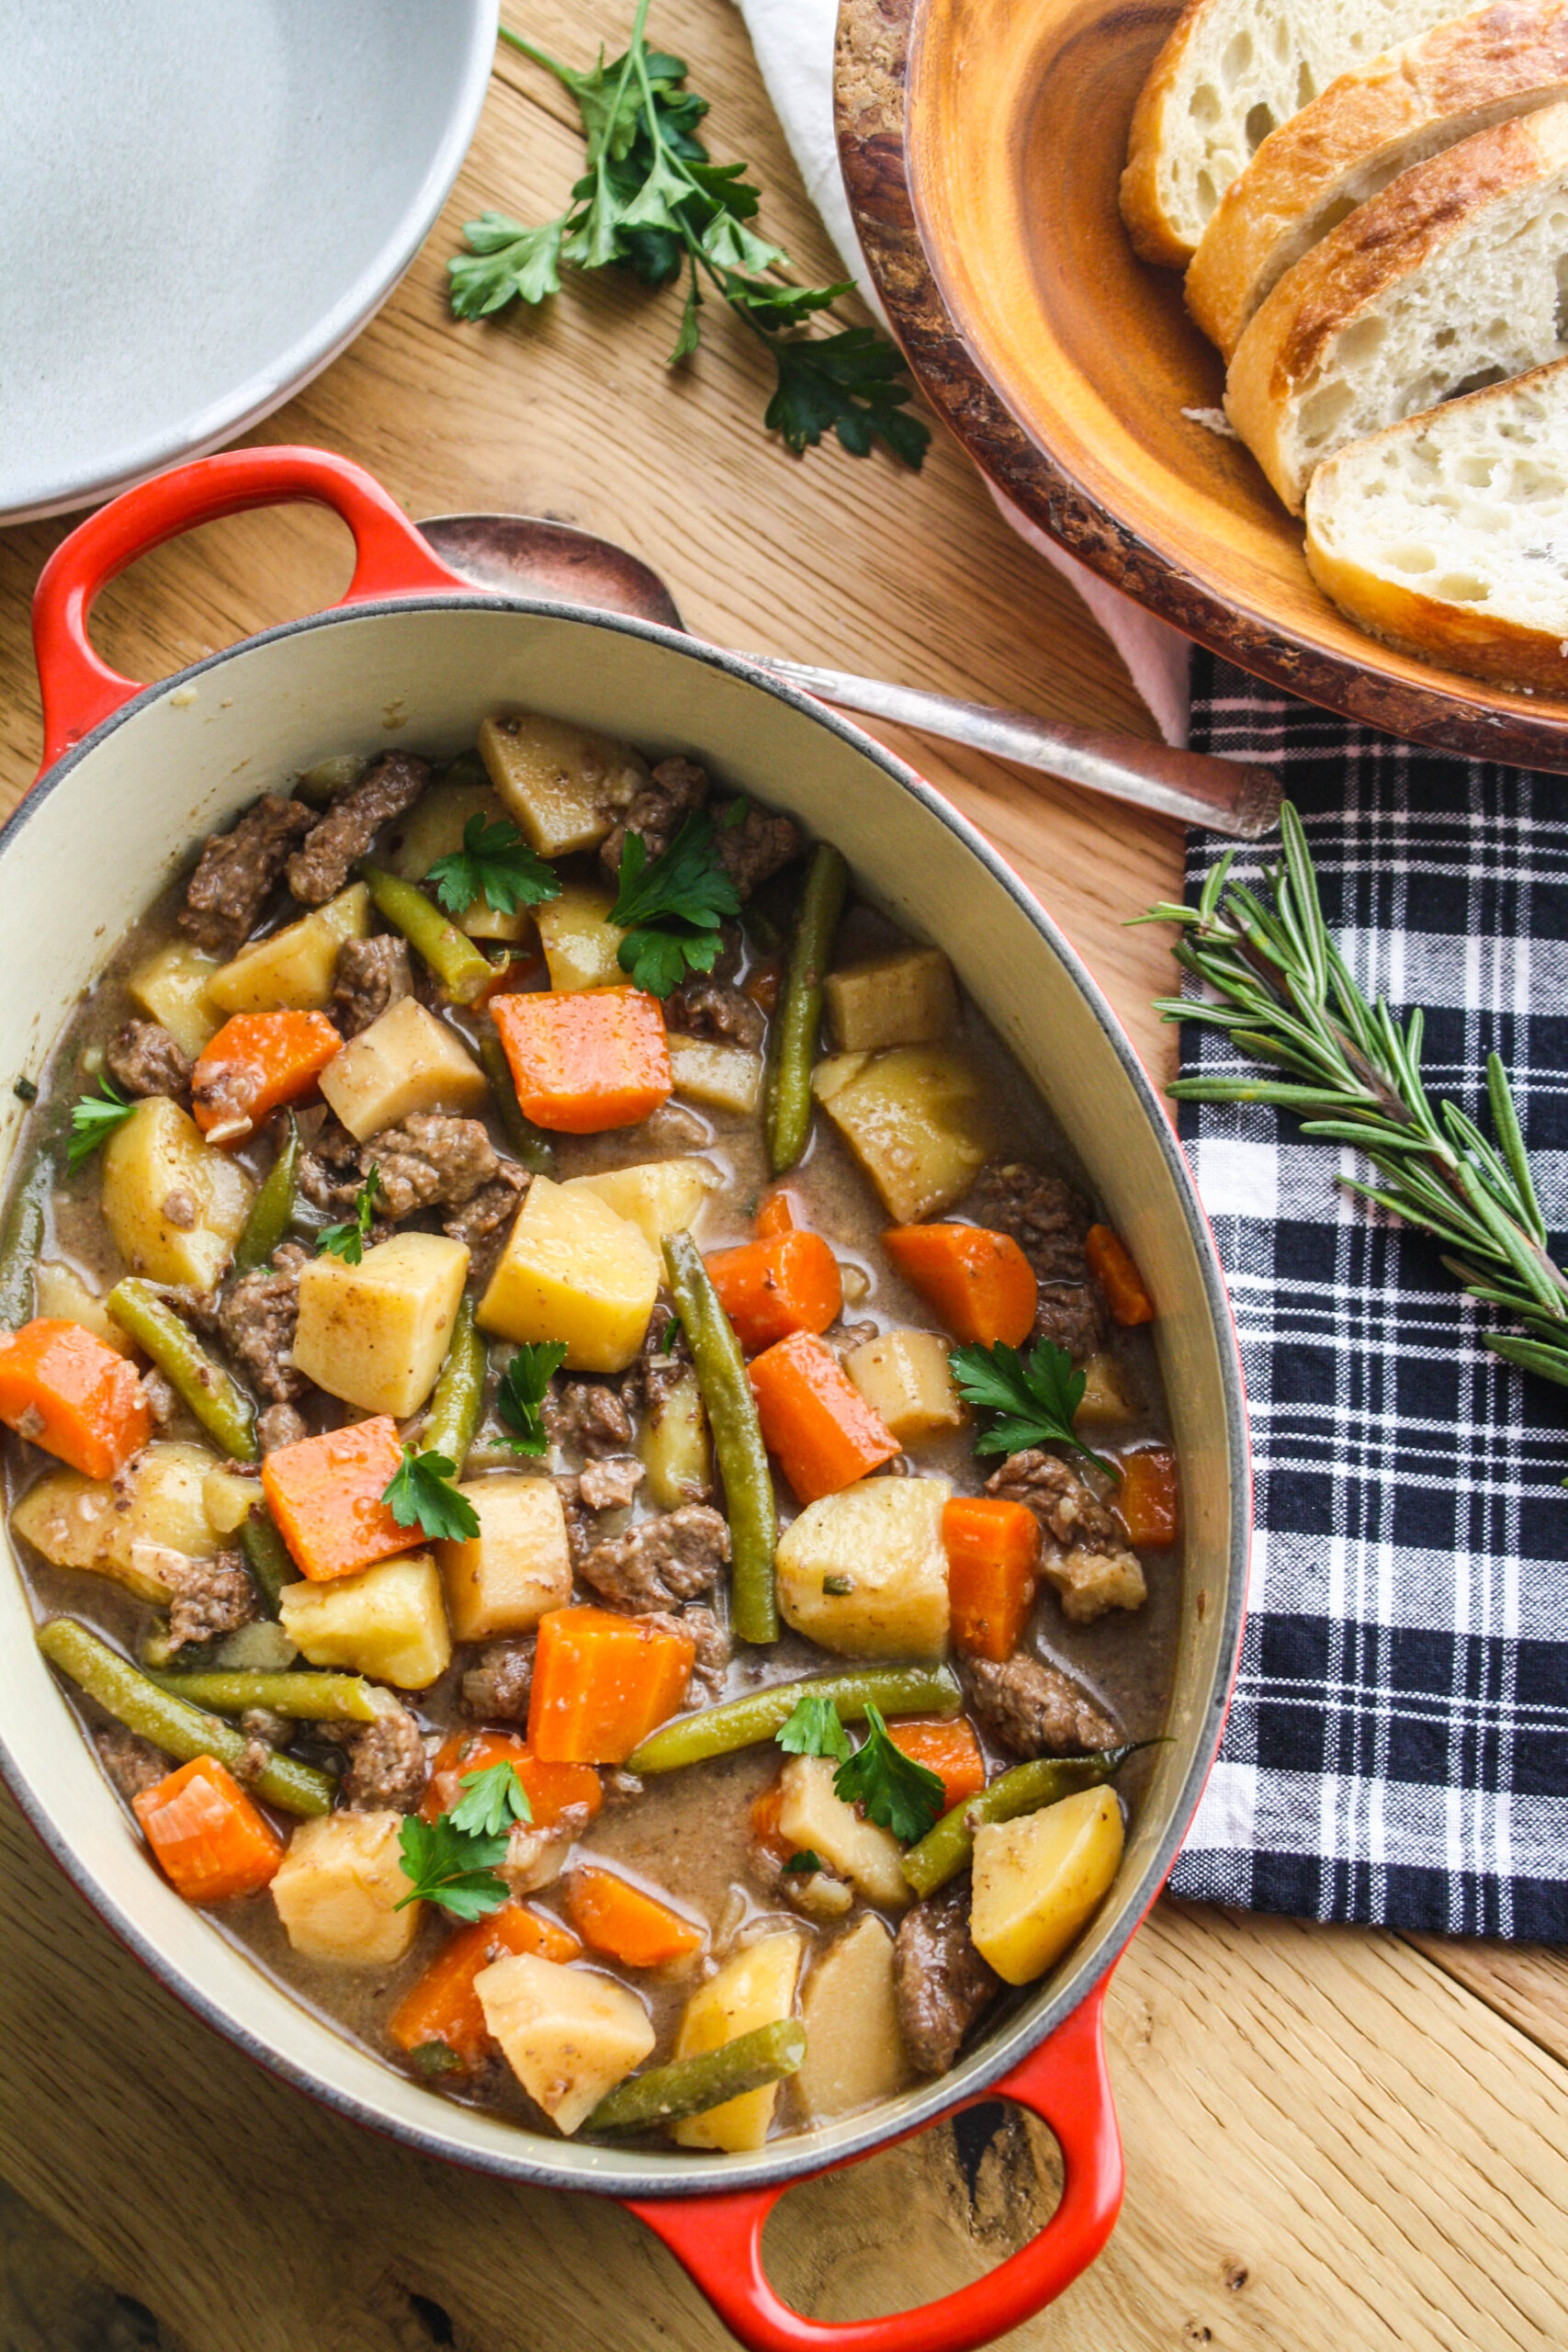 Hearty Beef Stew is a must for a meal during the cold weather months. You'll love this classic and flavorful stew!